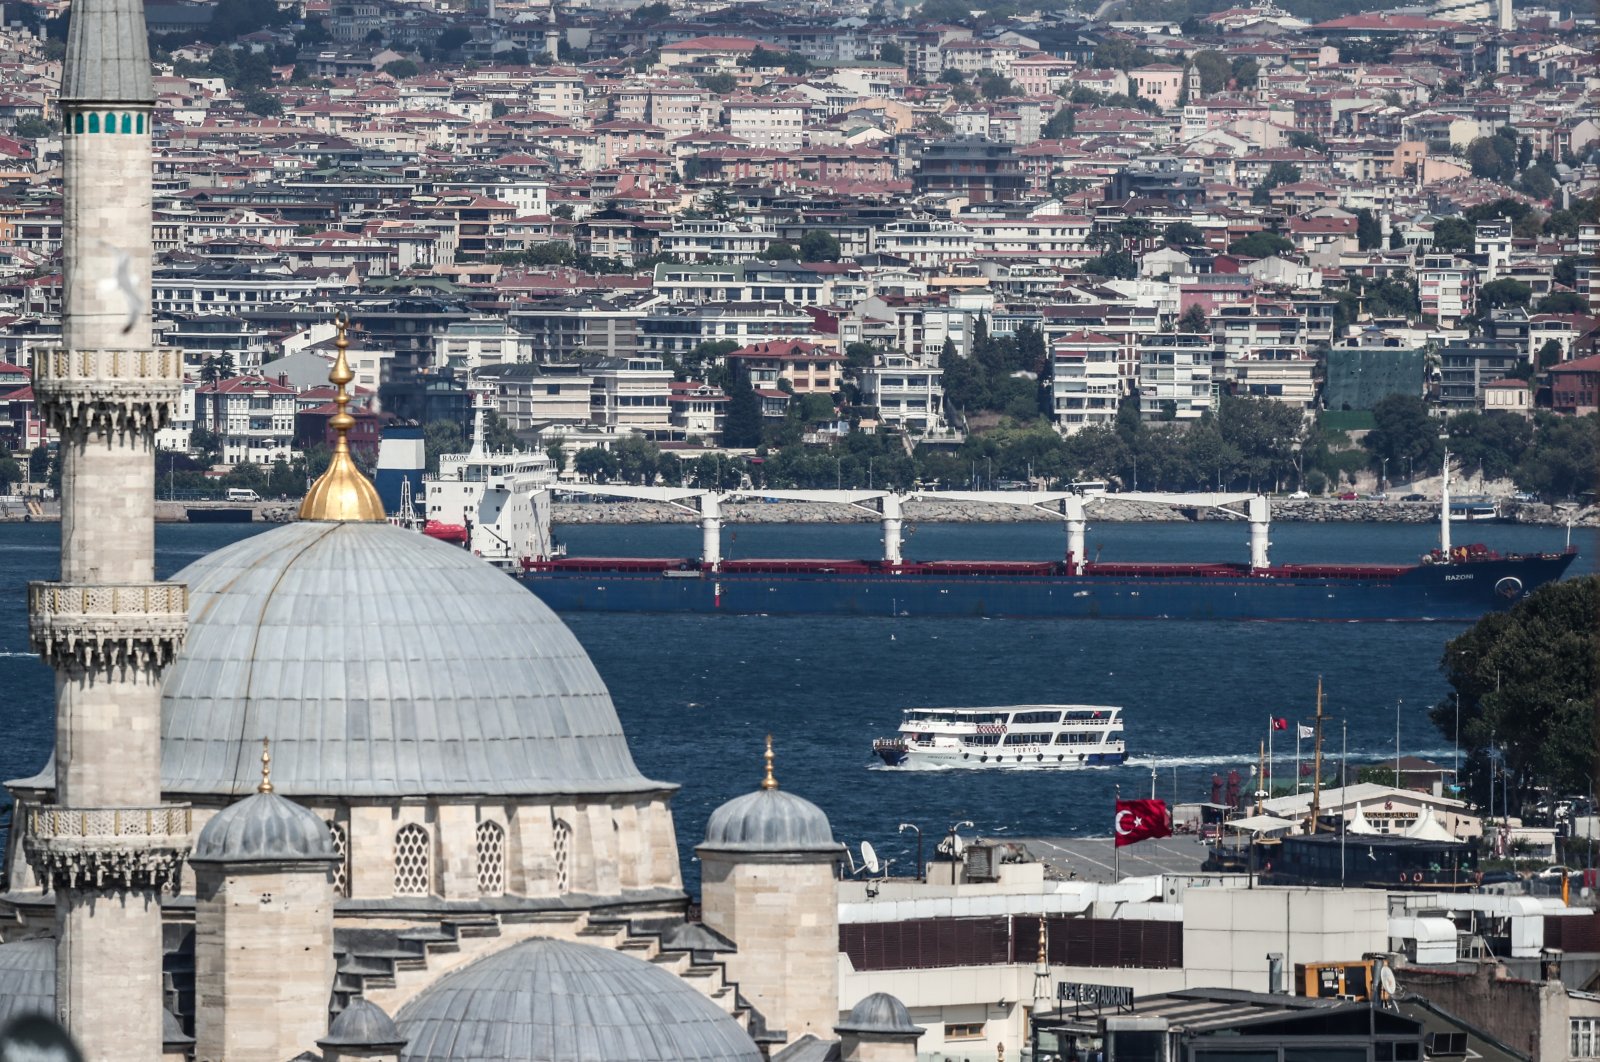 Sierra Leone-flagged cargo ship Razoni, which left the port of Odessa with the first grain shipment for export, sails through the Bosporus after an inspection, with Yeni Mosque in the foreground, in Istanbul, Turkey,  Aug. 3, 2022. (EPA Photo)